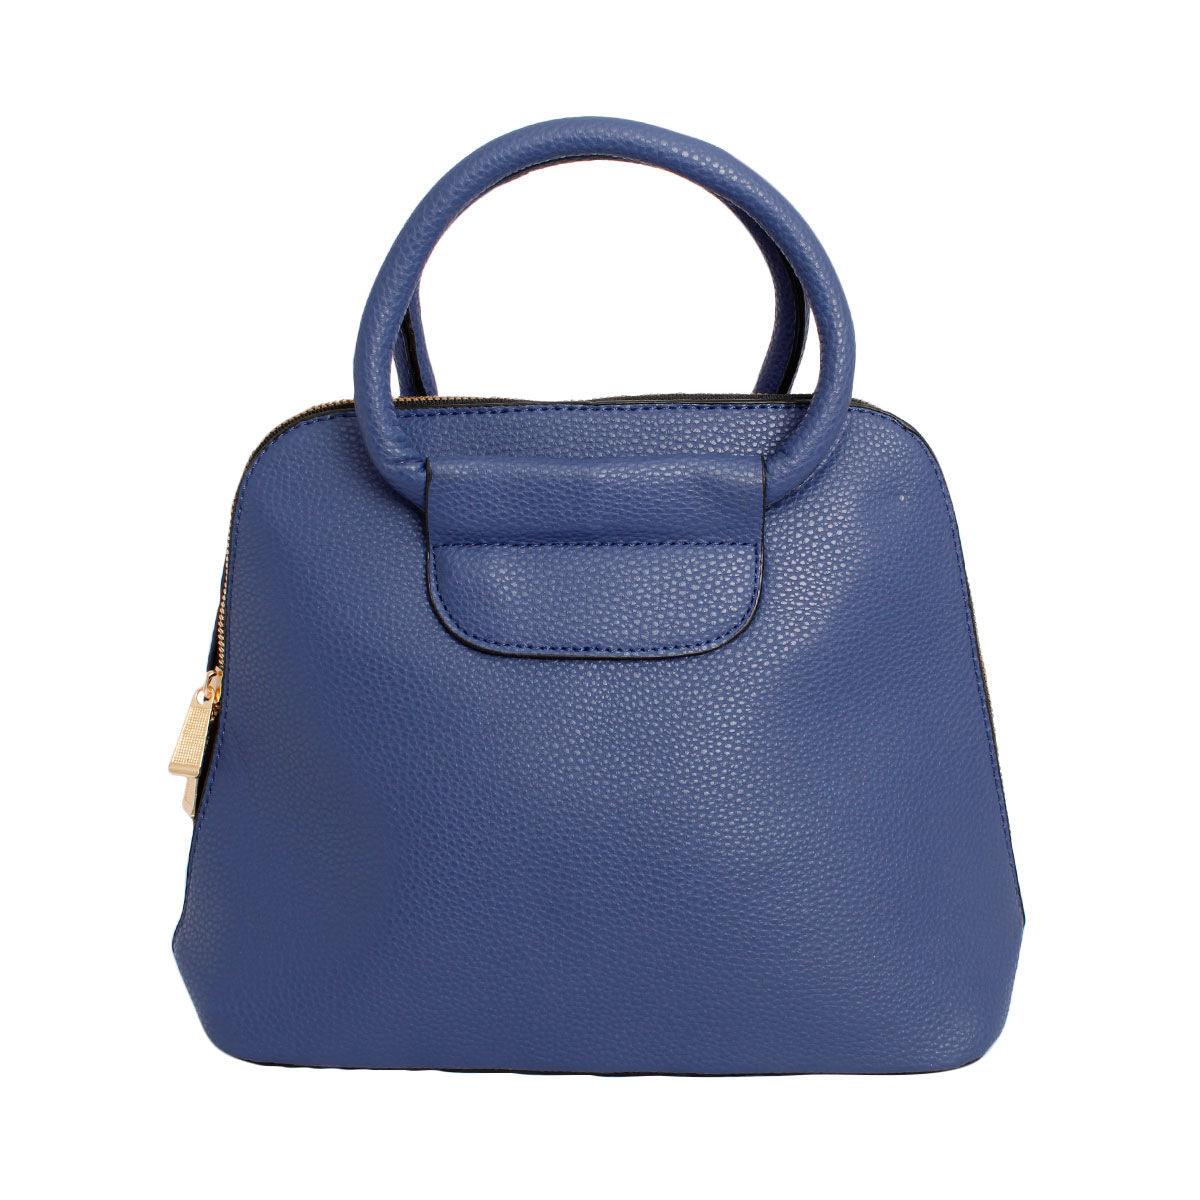 Must-Have Accessory: Chic Women's Blue Handbag Ensemble Coveted Classic